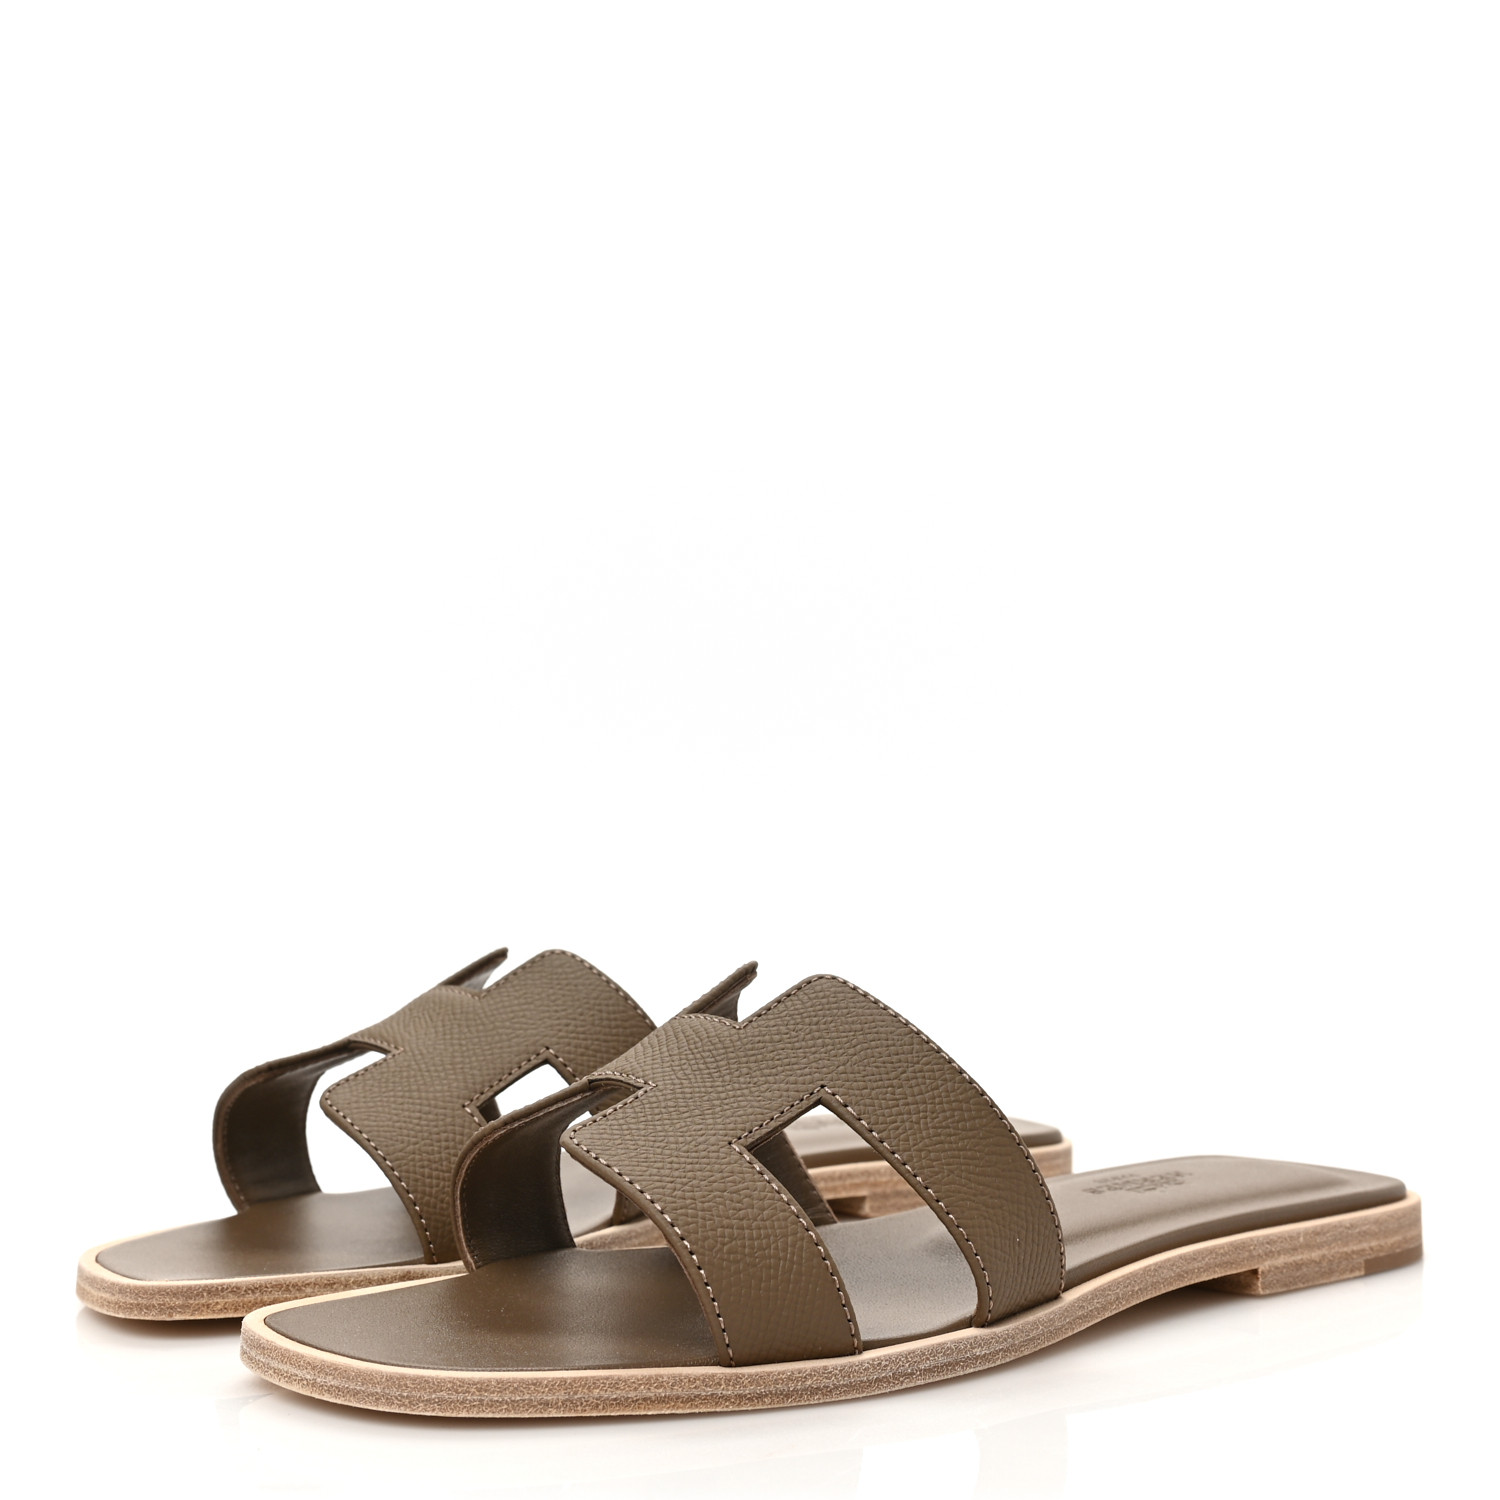 HERMES Epsom Oran Sandals in the color Etoupe by FASHIONPHILE